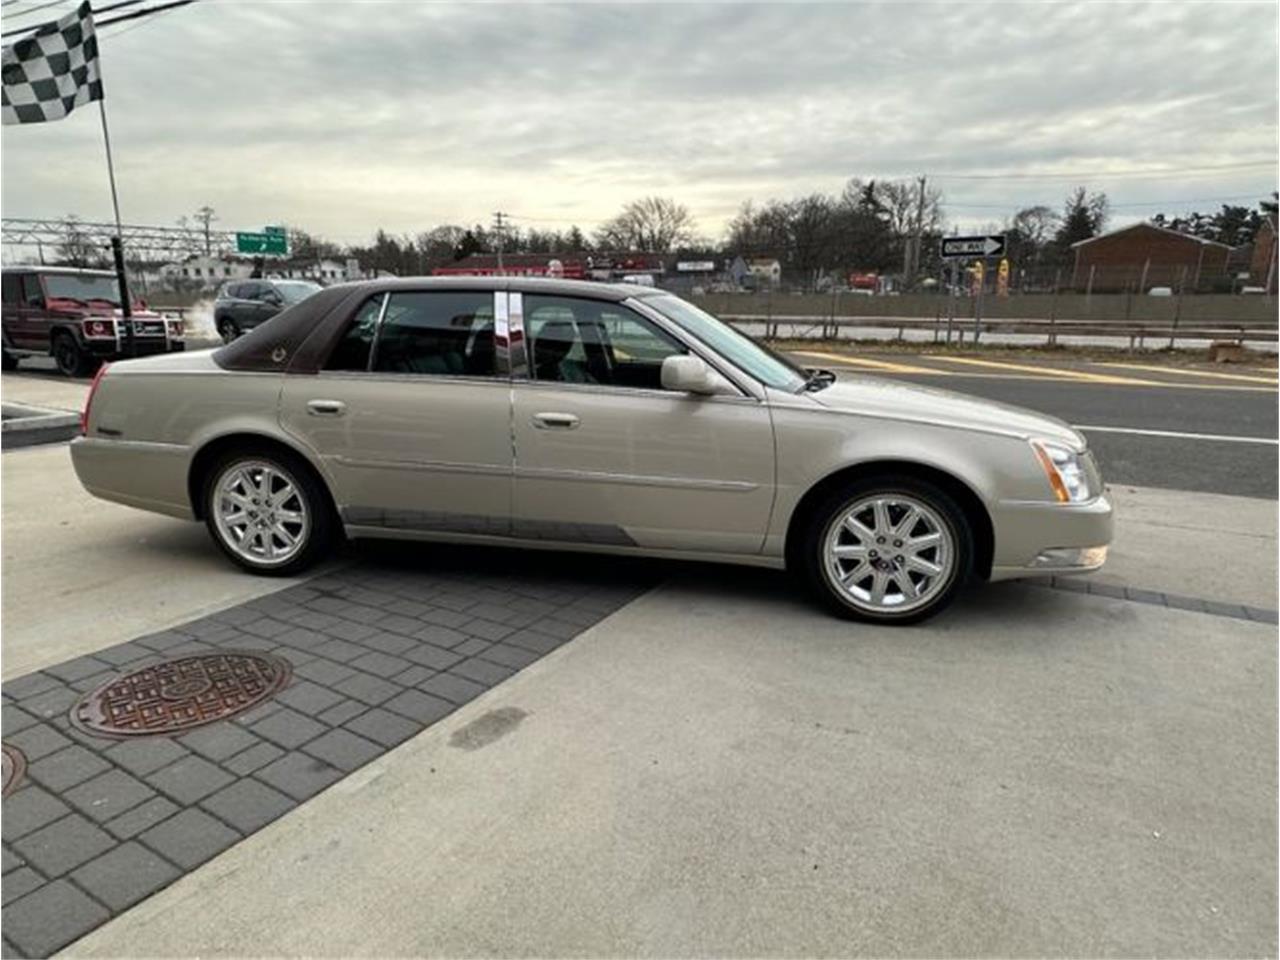 For Sale: 2011 Cadillac DTS in Cadillac, Michigan for sale in Cadillac, MI